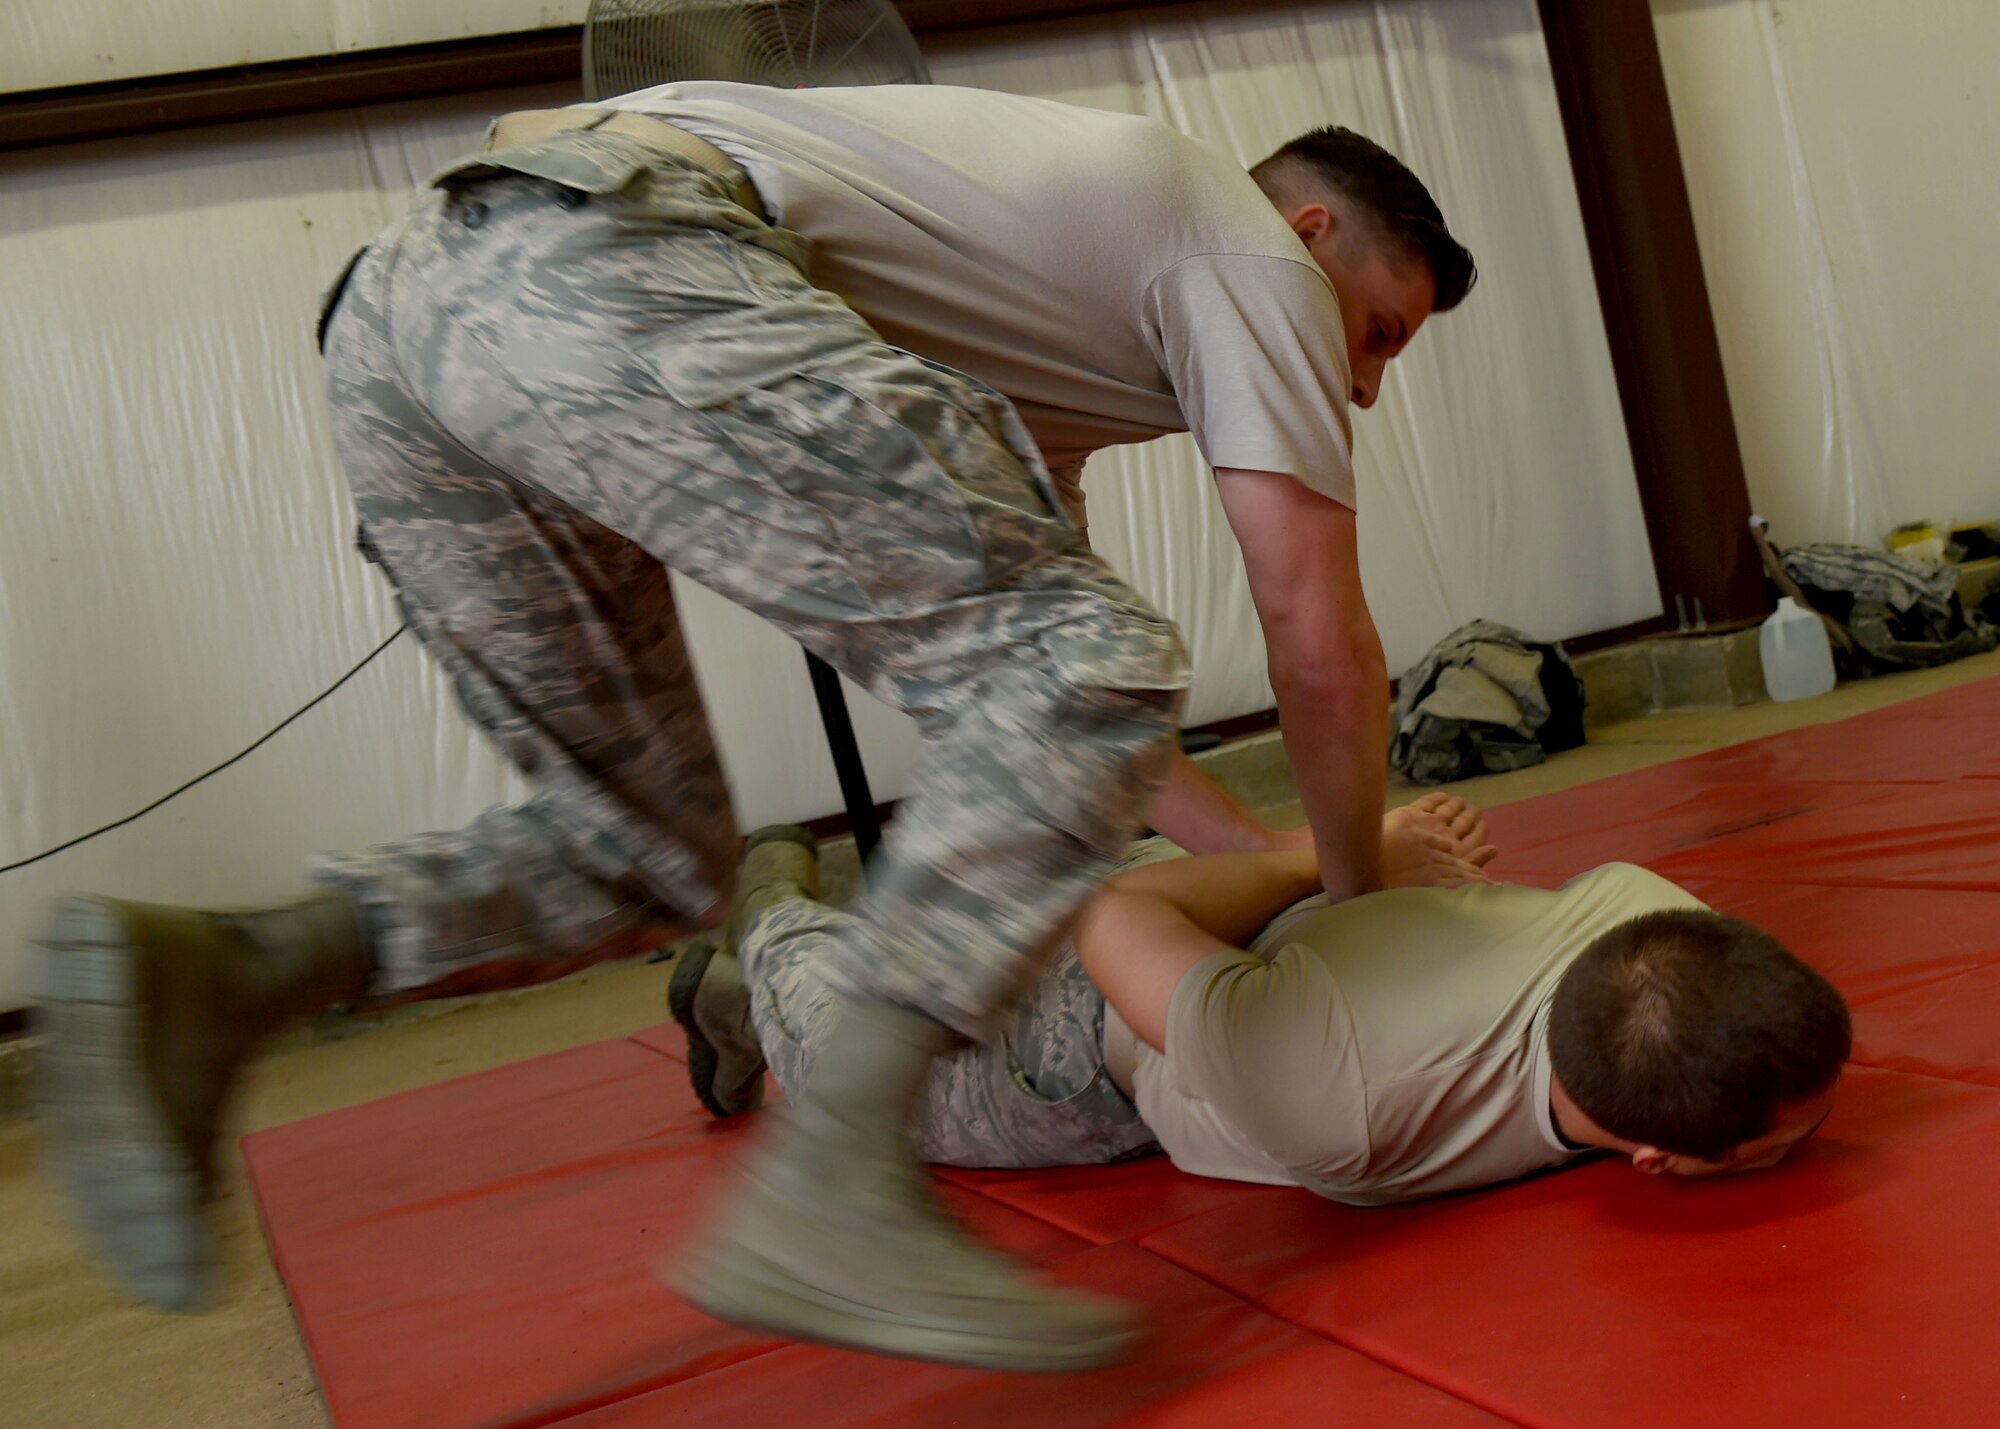 Members of the 97th Security Forces Squadron practice take down maneuvers on Sept. 13, 2016, Altus Air Force Base, Okla. 97th SFS Airmen participated in a week-long training course that taught hand-to-hand defensive and subduing techniques, weapons handling and clearing and securing buildings, aircraft and buses as a team. (U.S. Air Force photo by Airman 1st Class Kirby Turbak/Released)   